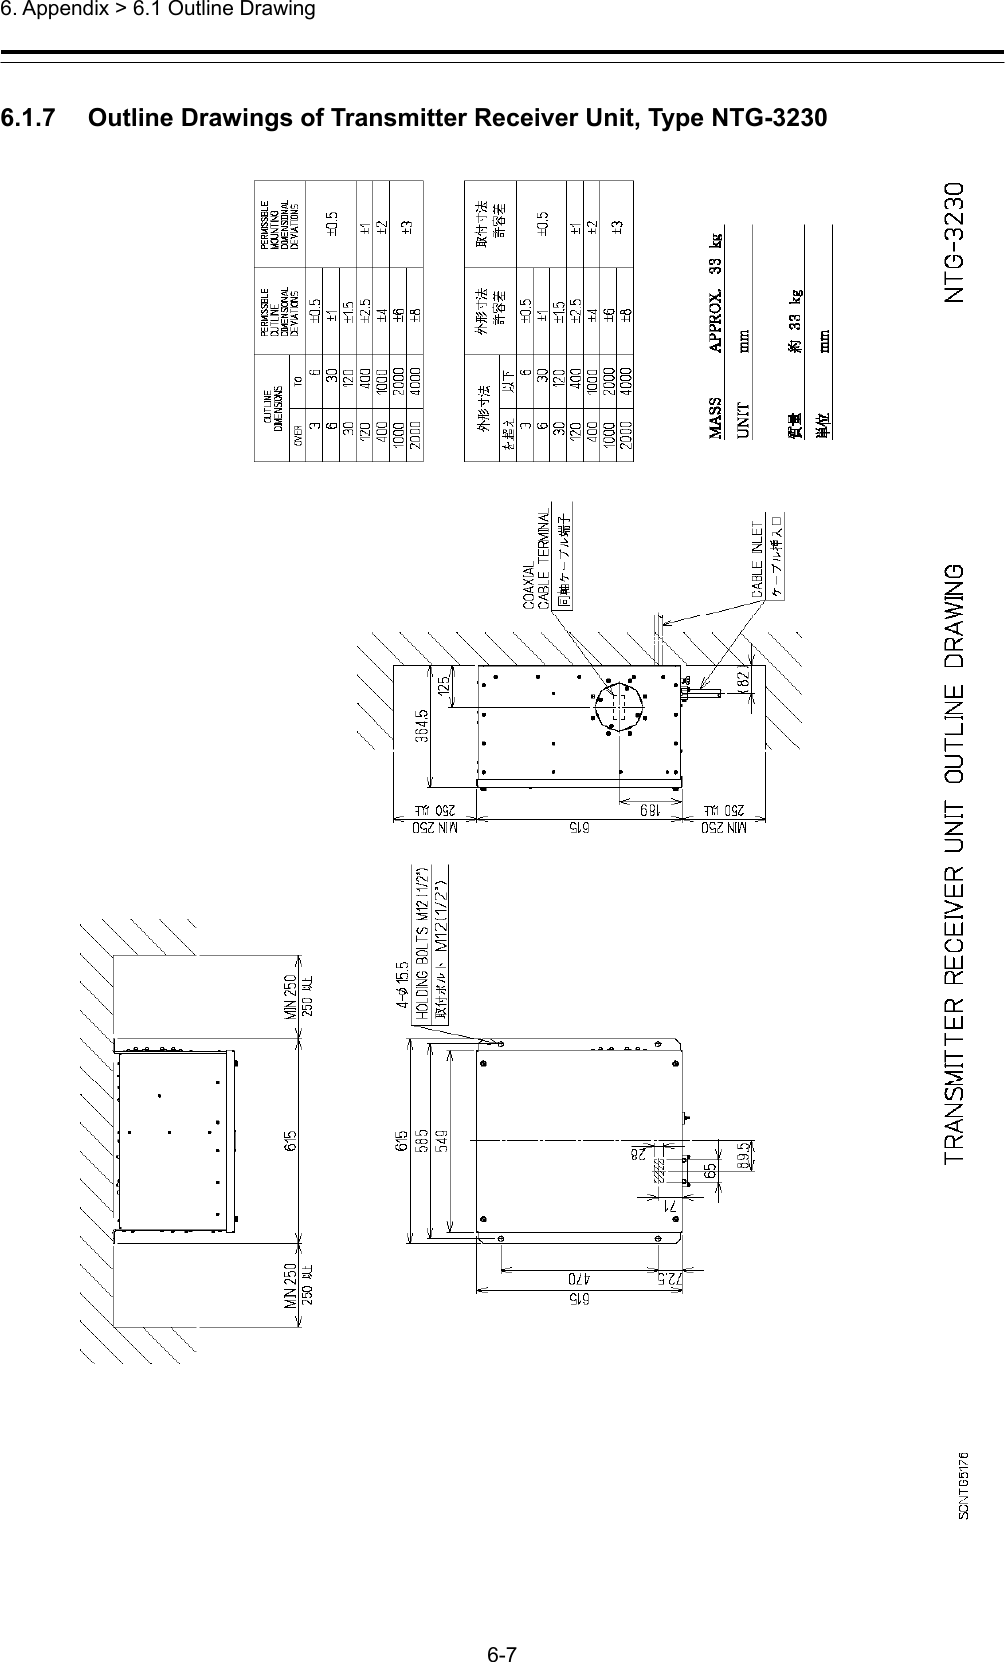  6. Appendix &gt; 6.1 Outline Drawing 6-7  6.1.7    Outline Drawings of Transmitter Receiver Unit, Type NTG-3230  